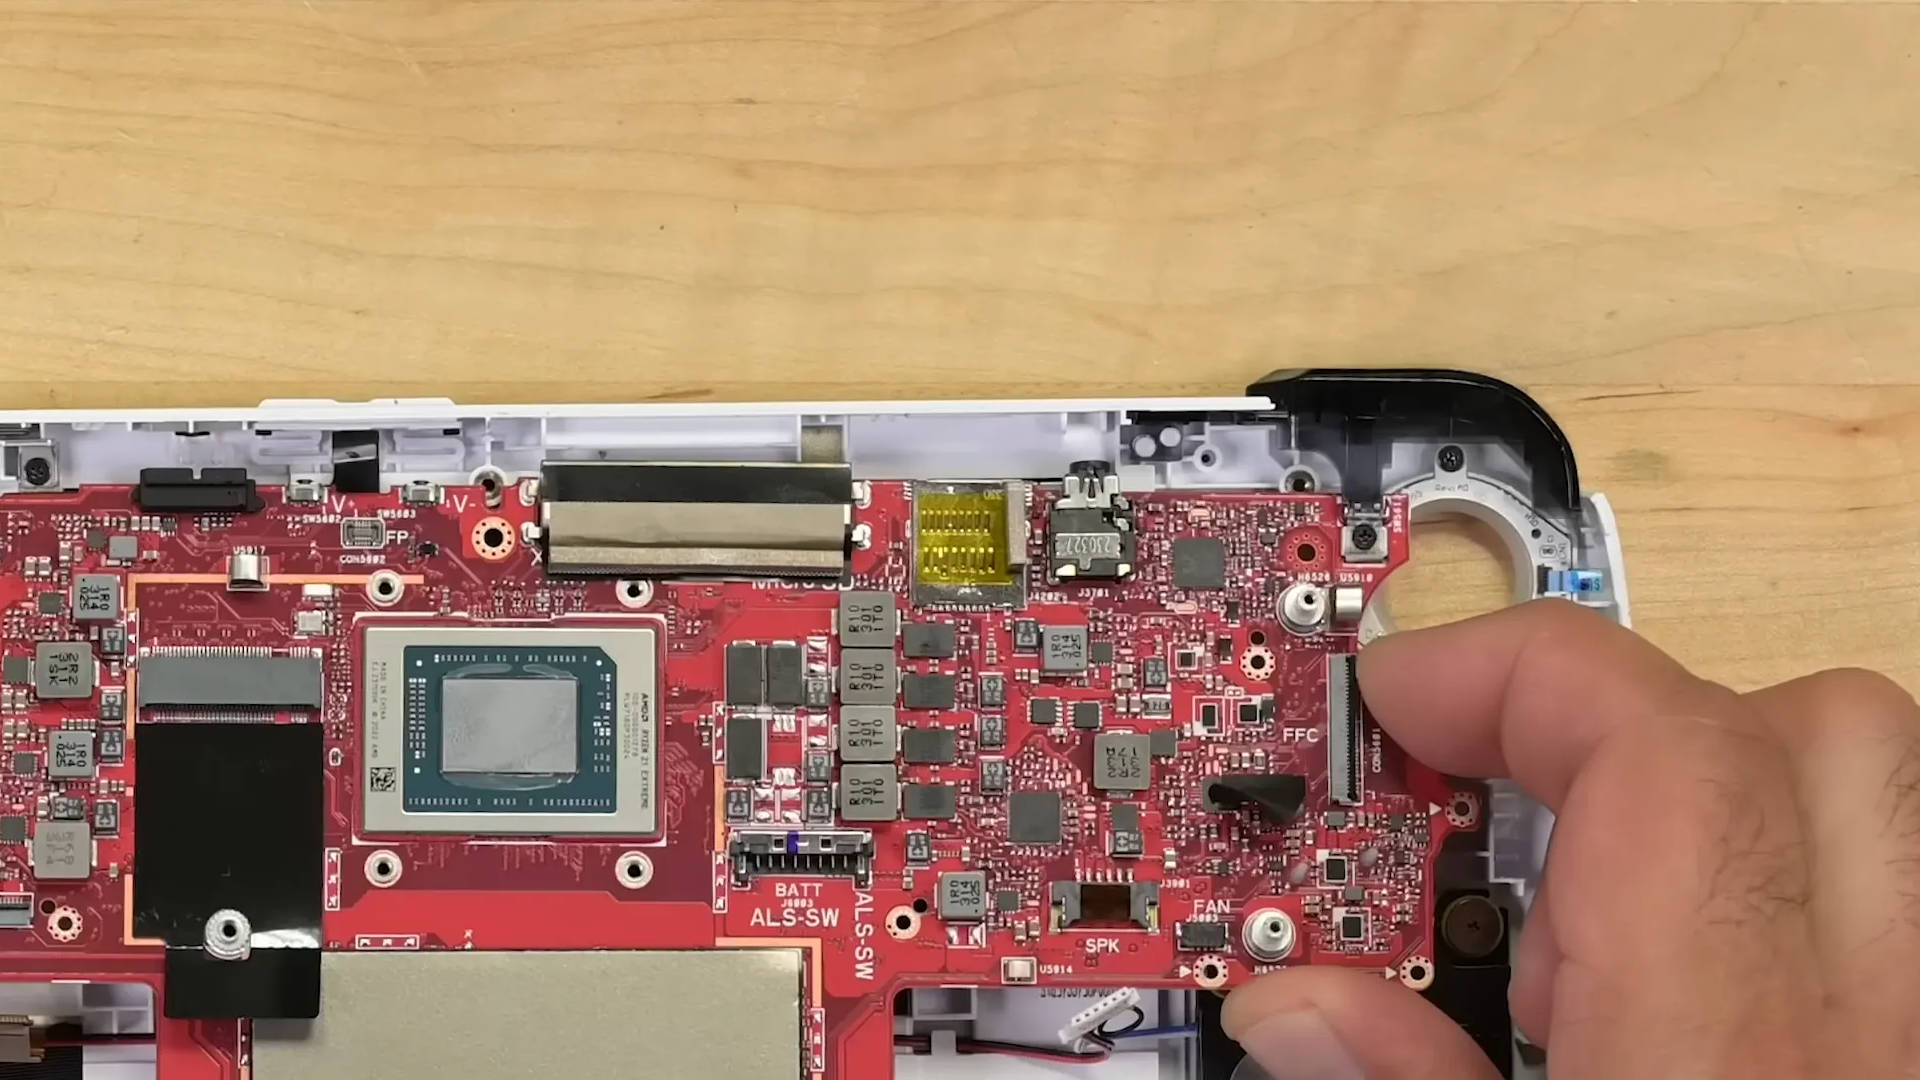 An image from the iFixit teardown video of the Asus ROG Ally handheld gaming PC